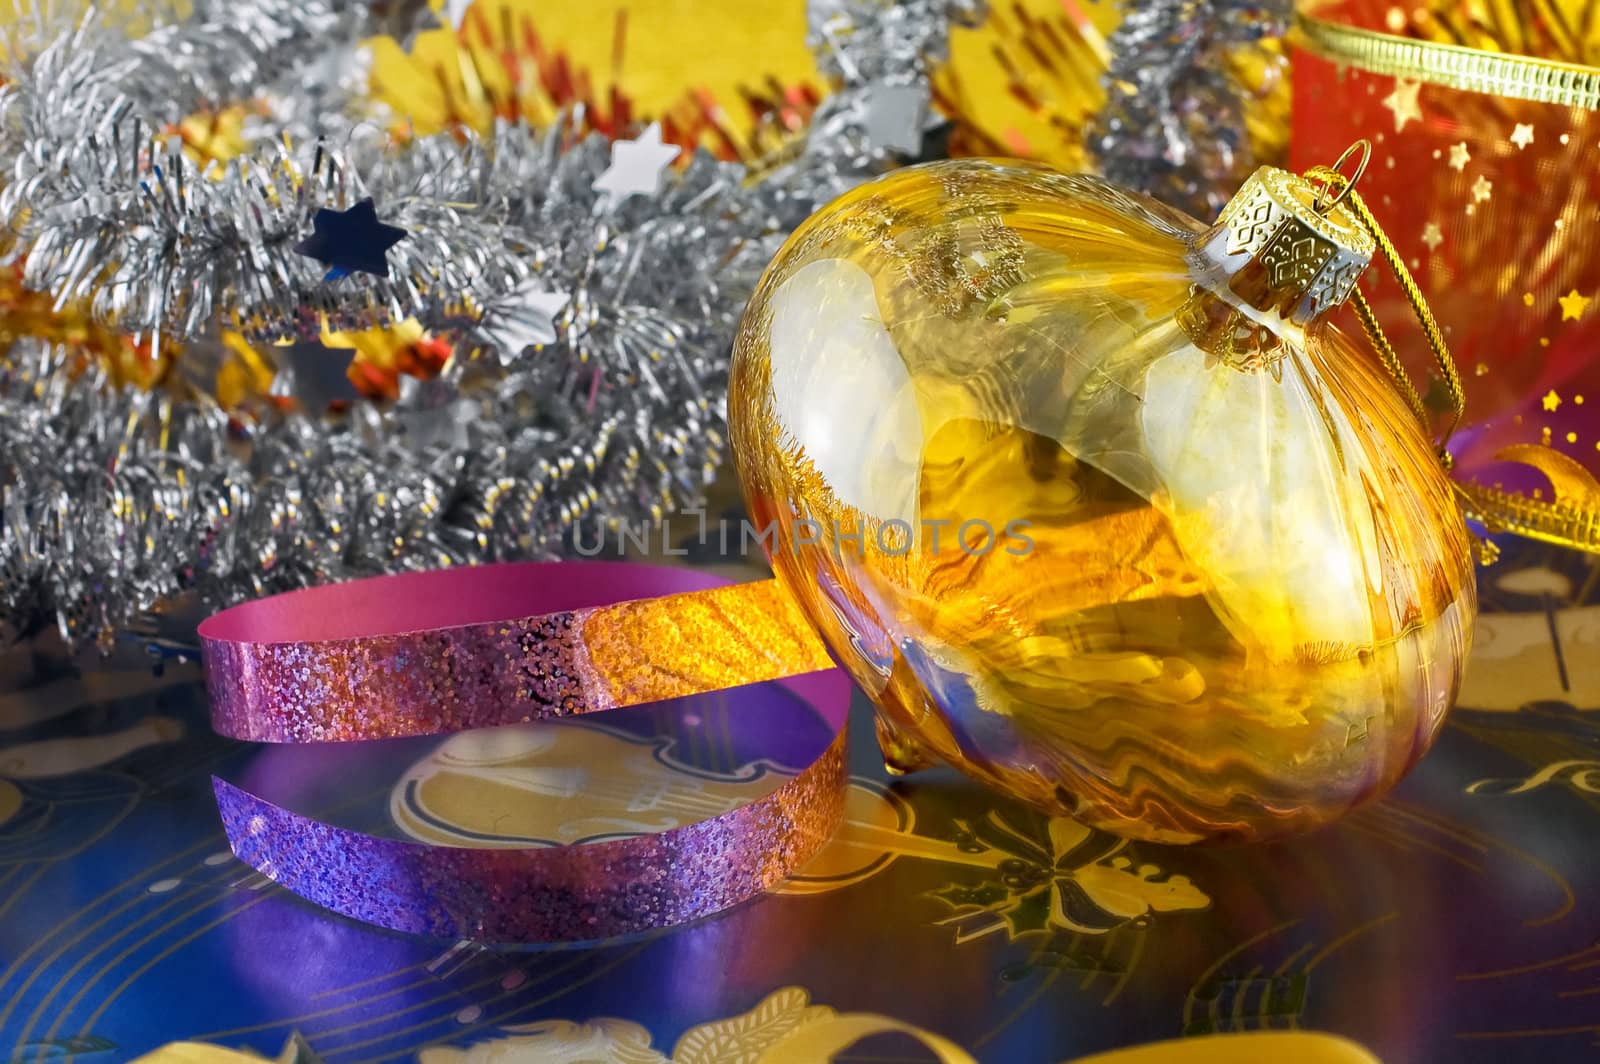 Glass Christmas bauble among tinsels and ribbons with selective focus